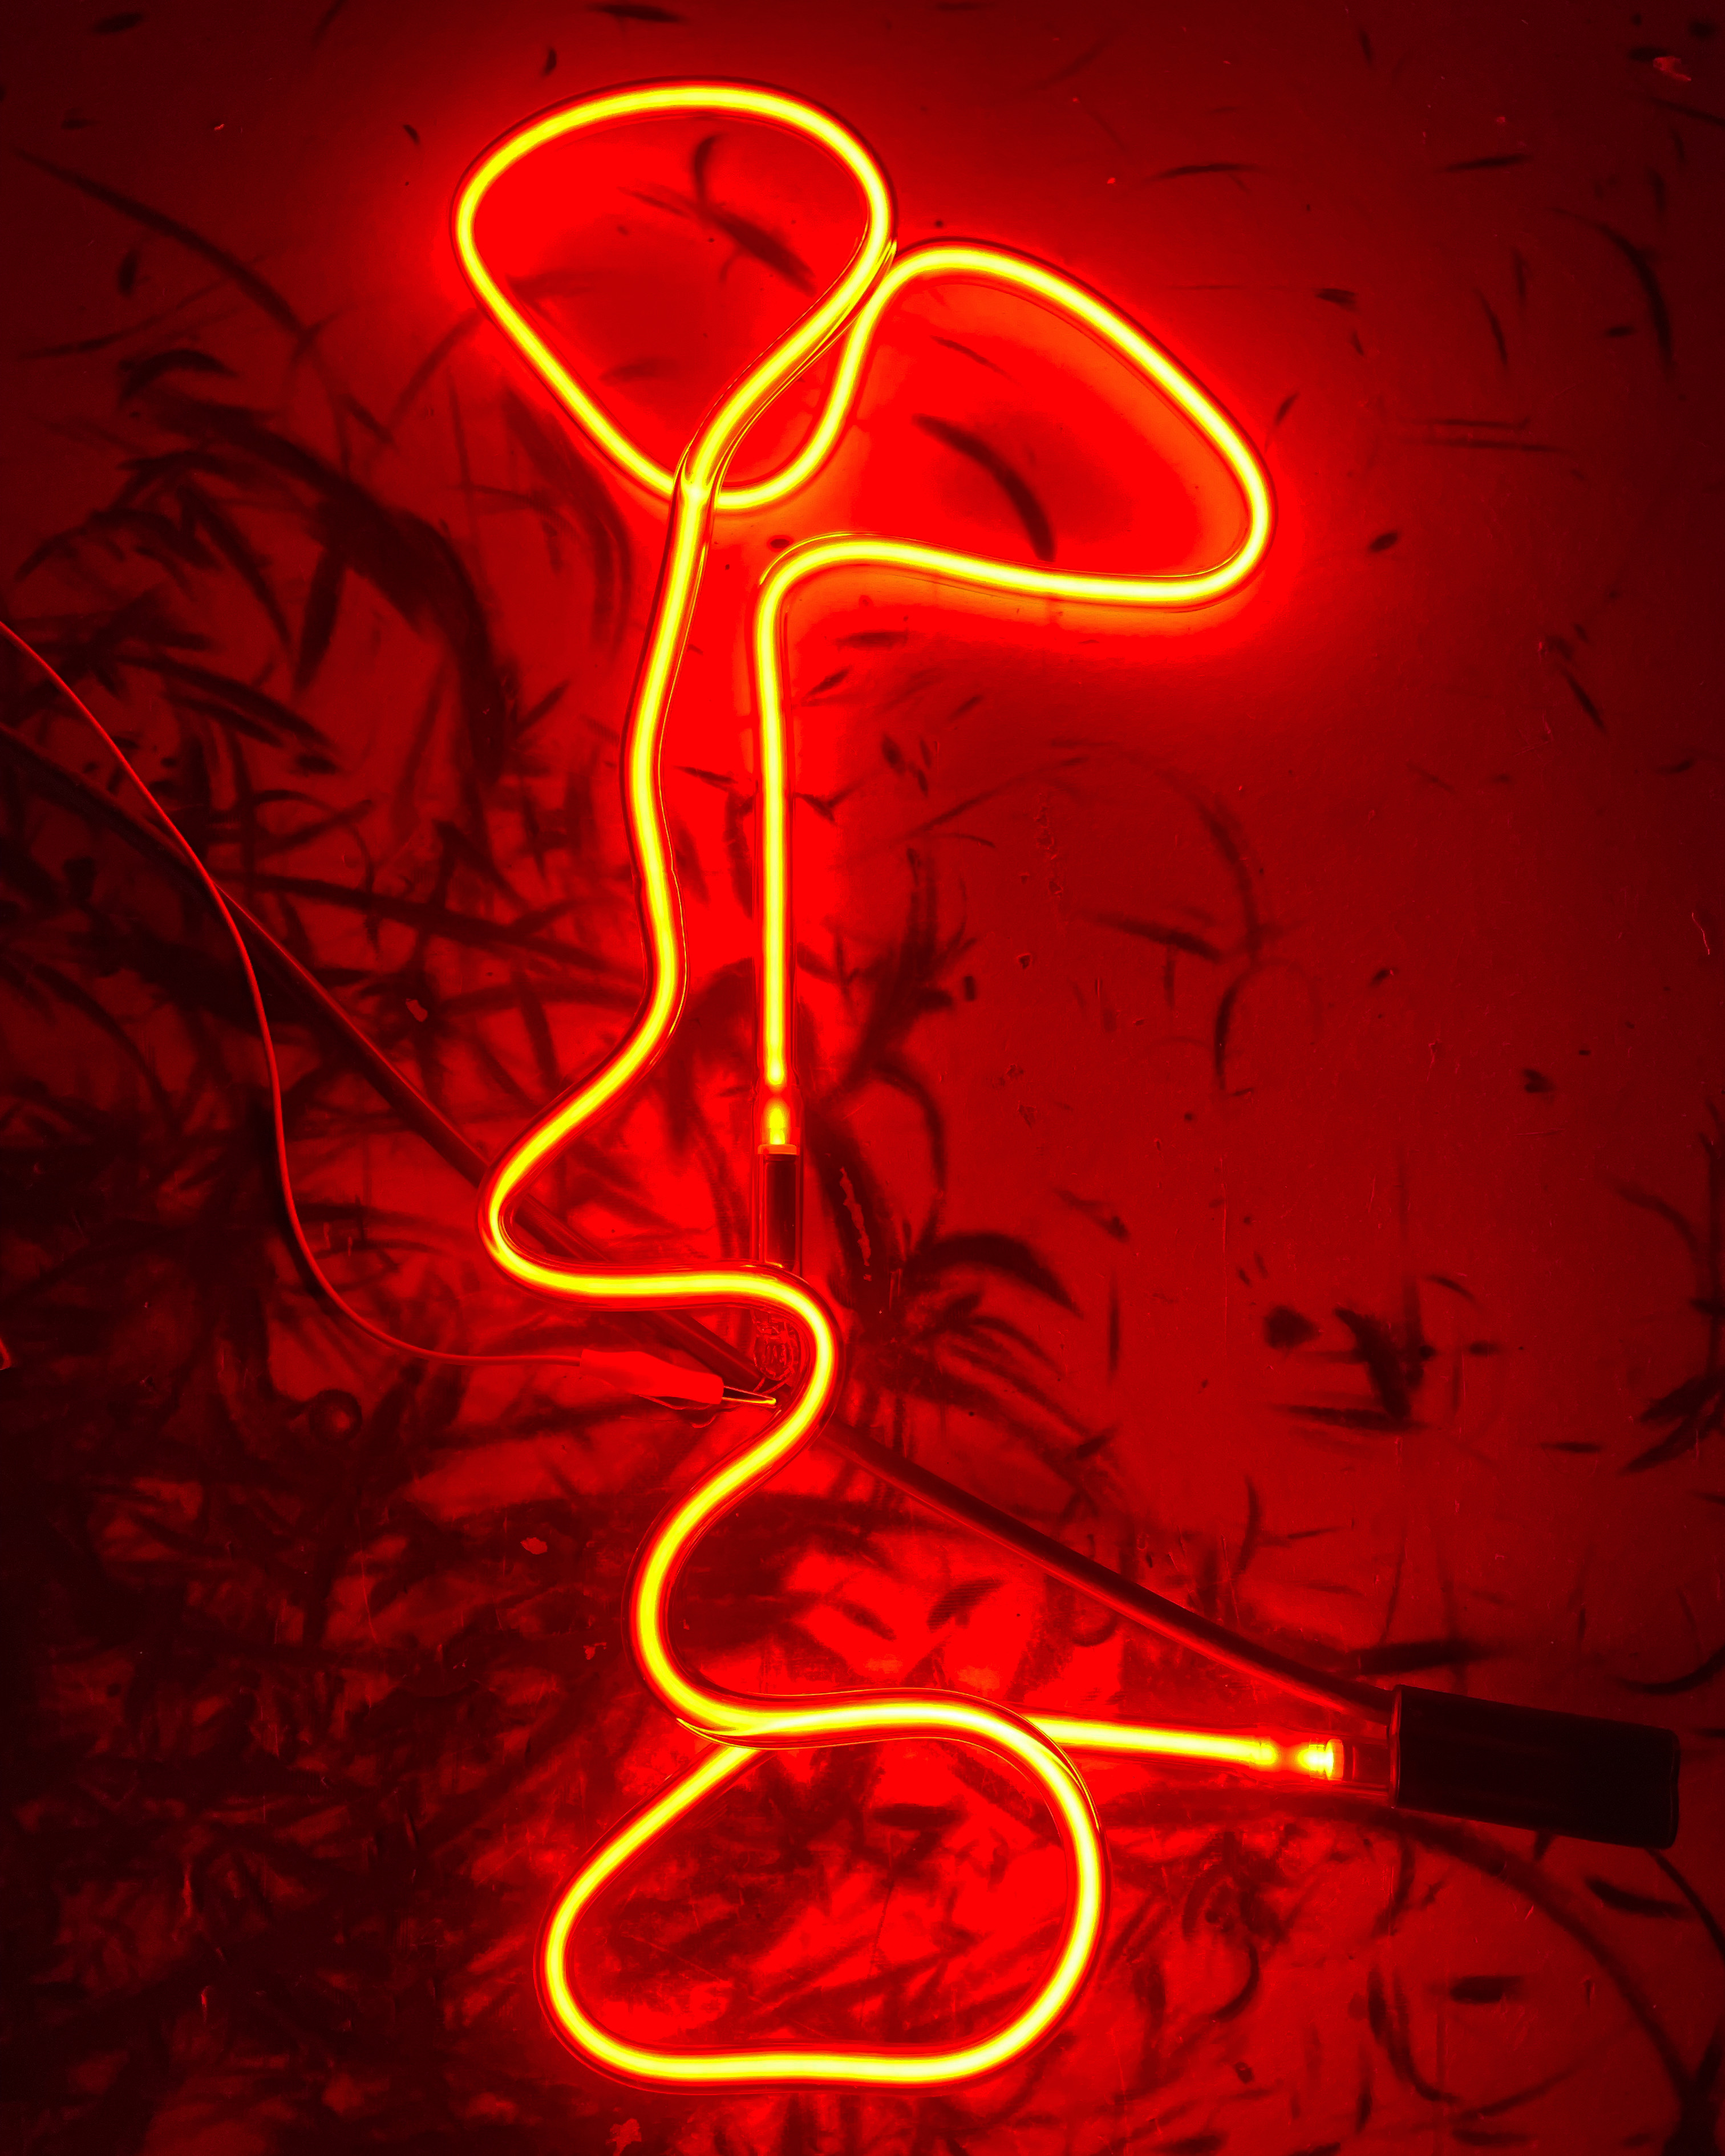 image of a red neon seedling